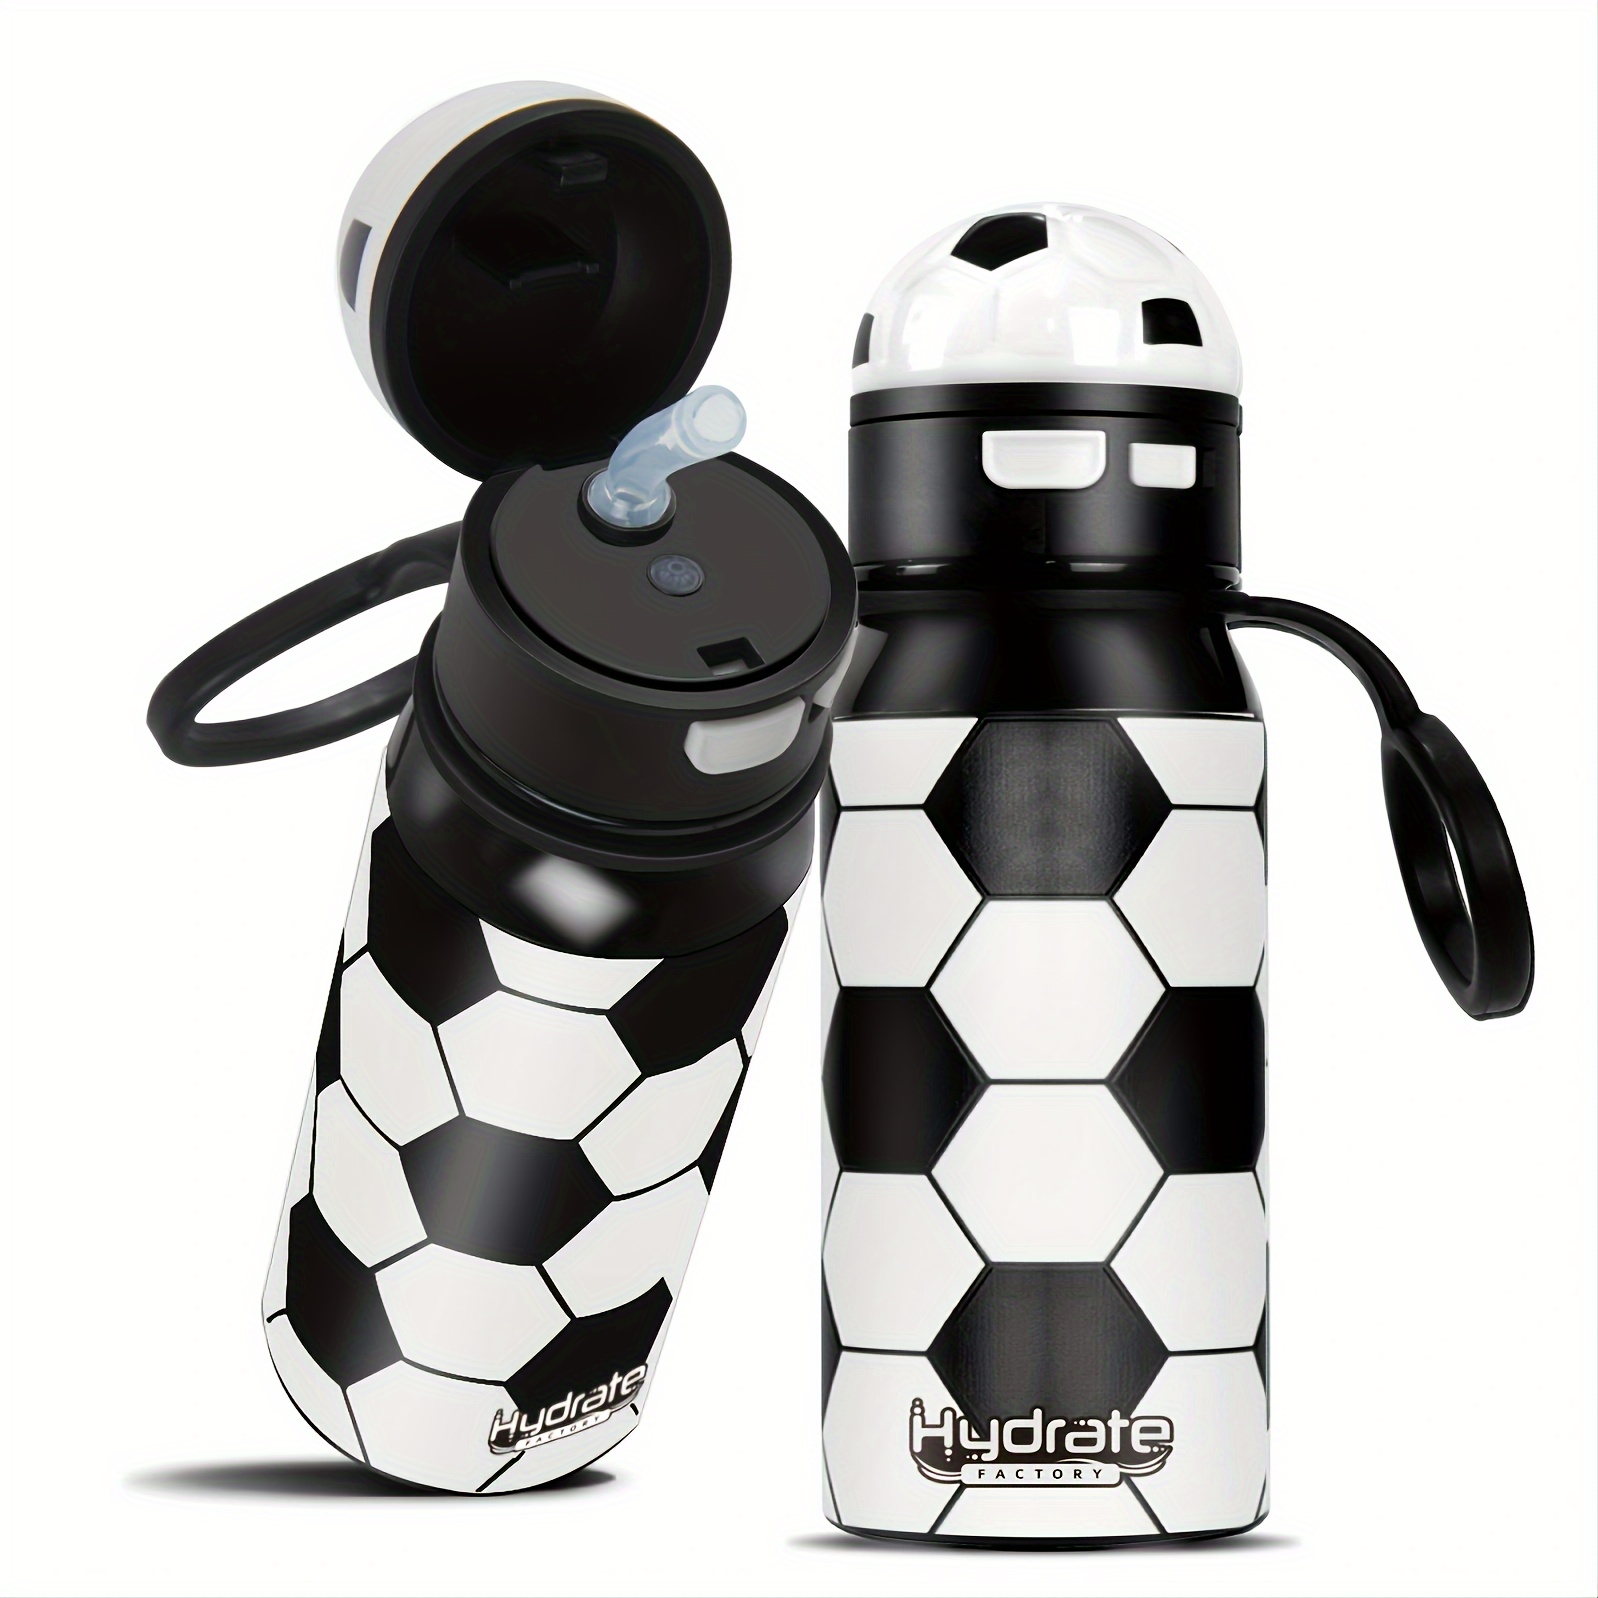 https://img.kwcdn.com/product/double-insulated-stainless-steel-water-bottle/d69d2f15w98k18-6360a891/Fancyalgo/VirtualModelMatting/6be86939a98f81fb6600ae23aee1abad.jpg?imageView2/2/w/500/q/60/format/webp